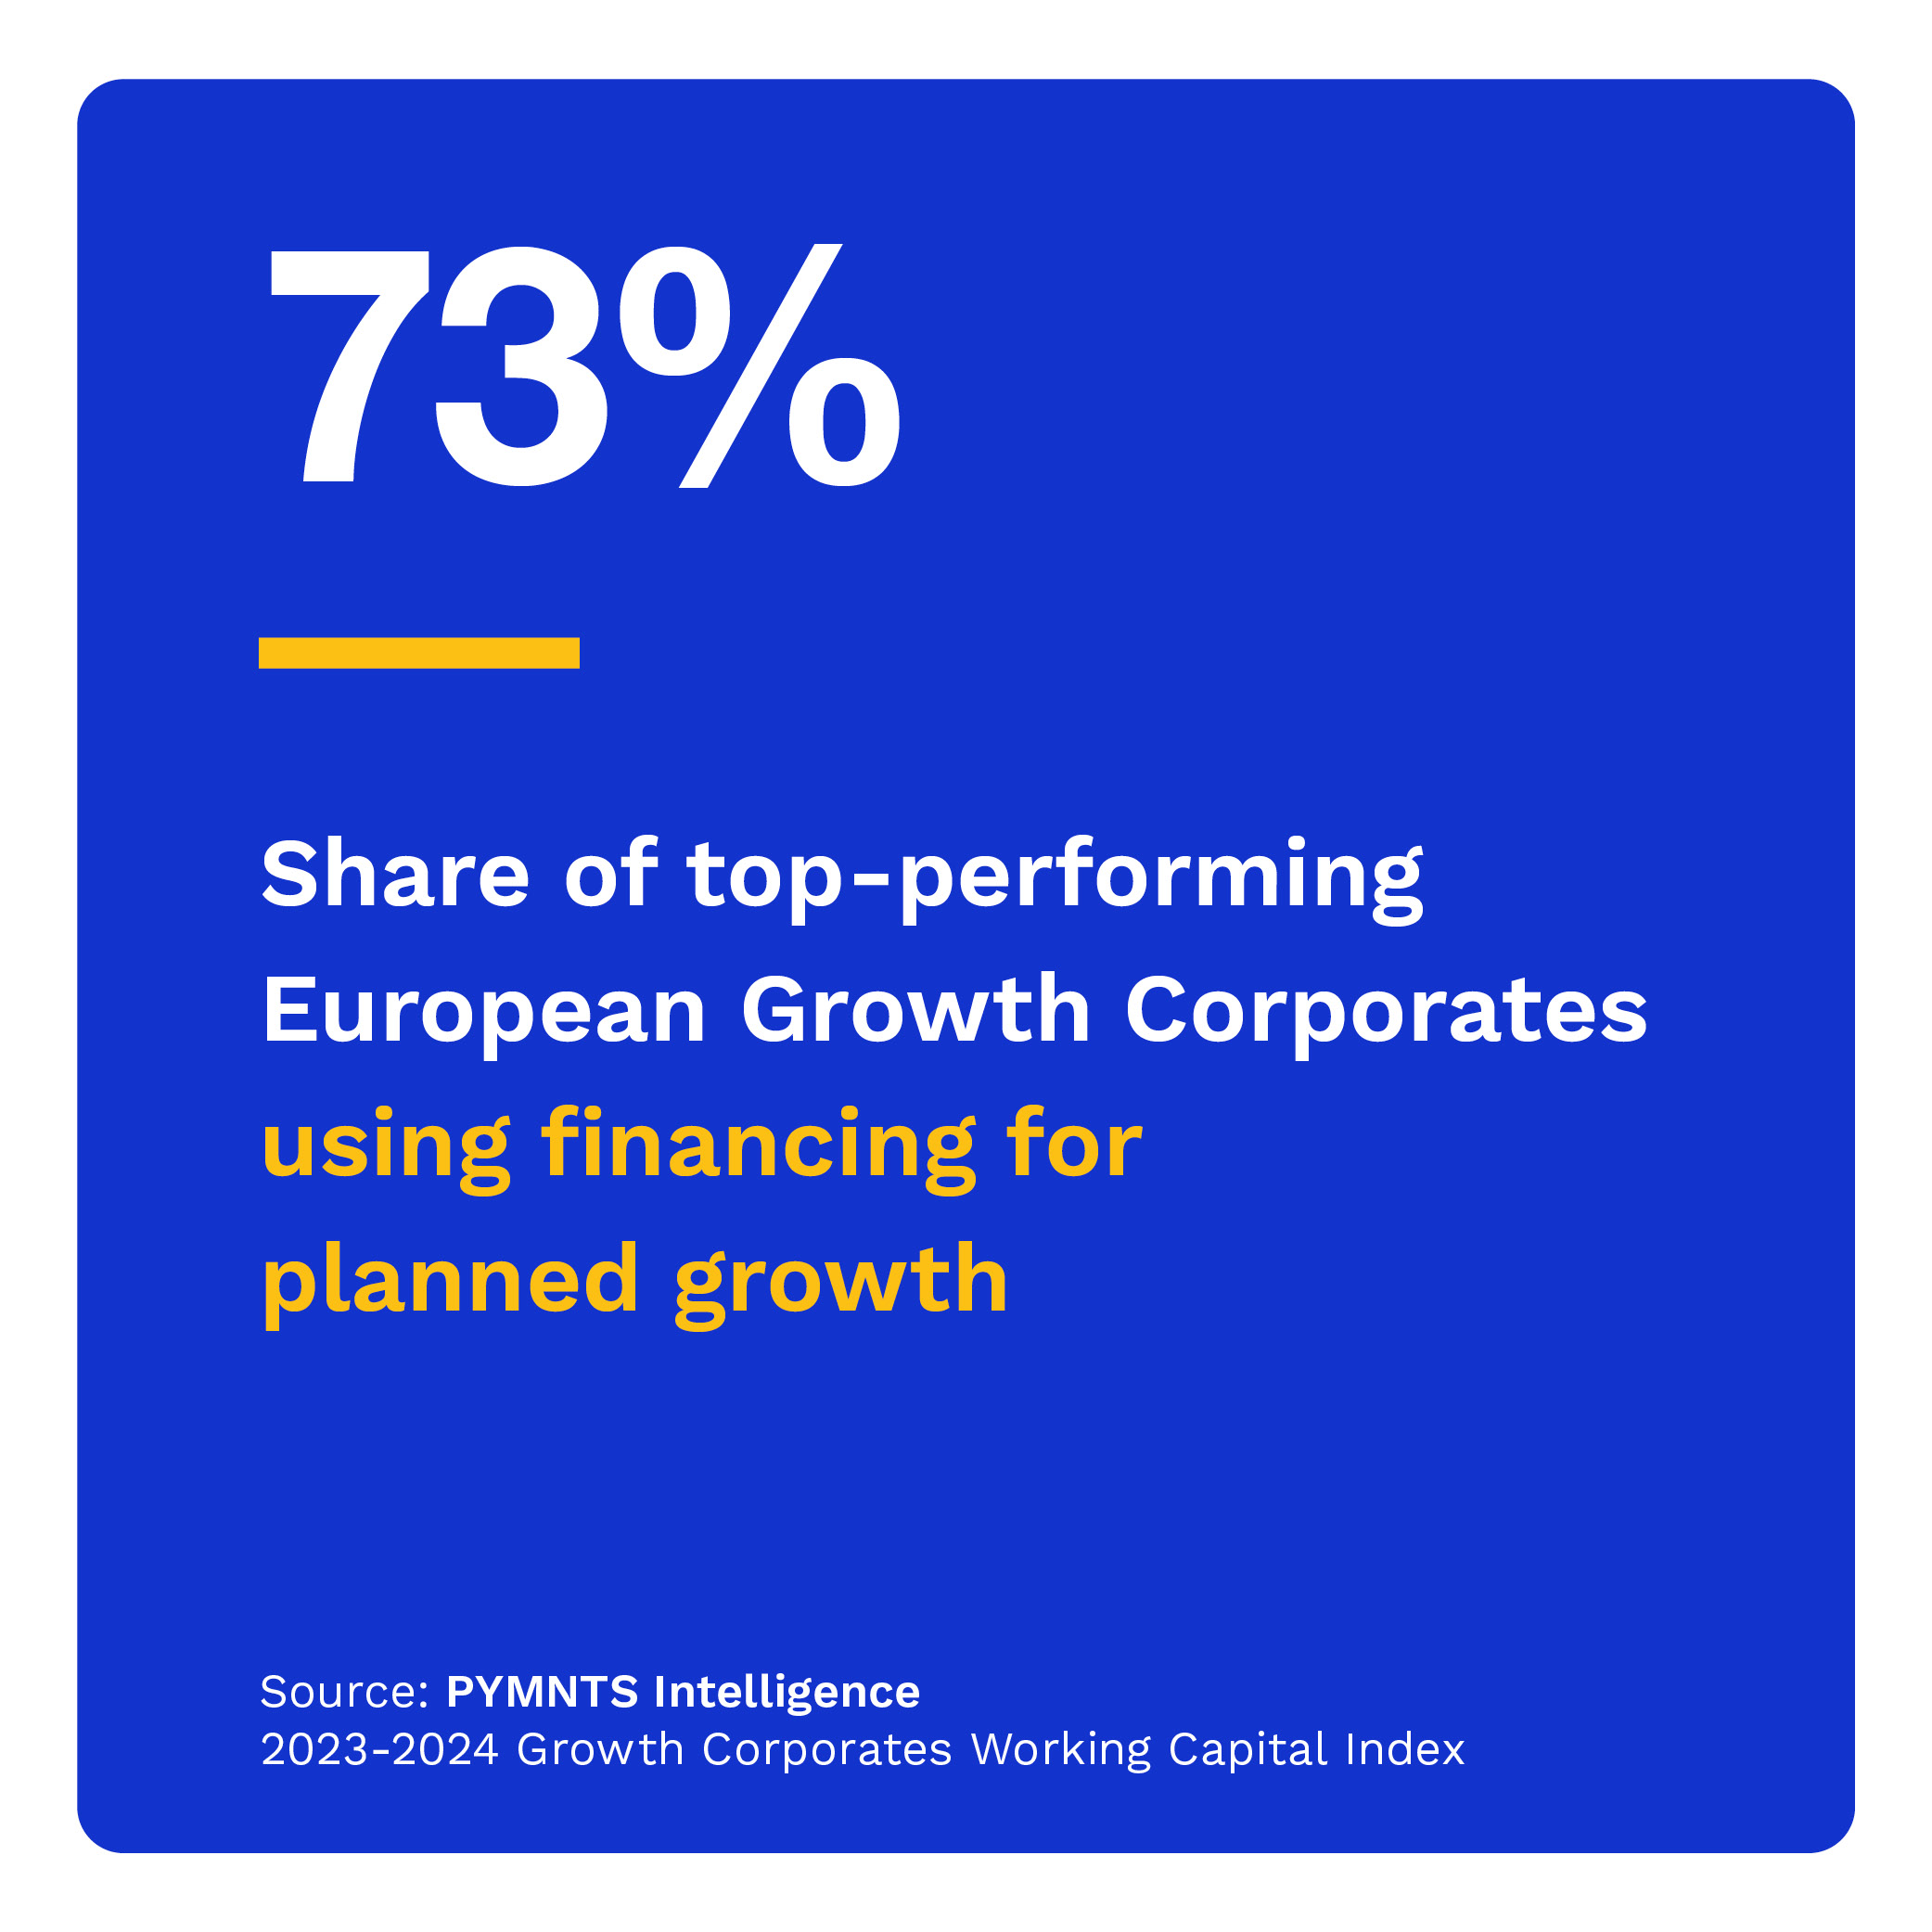 73%: Share of top-performing European Growth Corporates using financing for planned growth